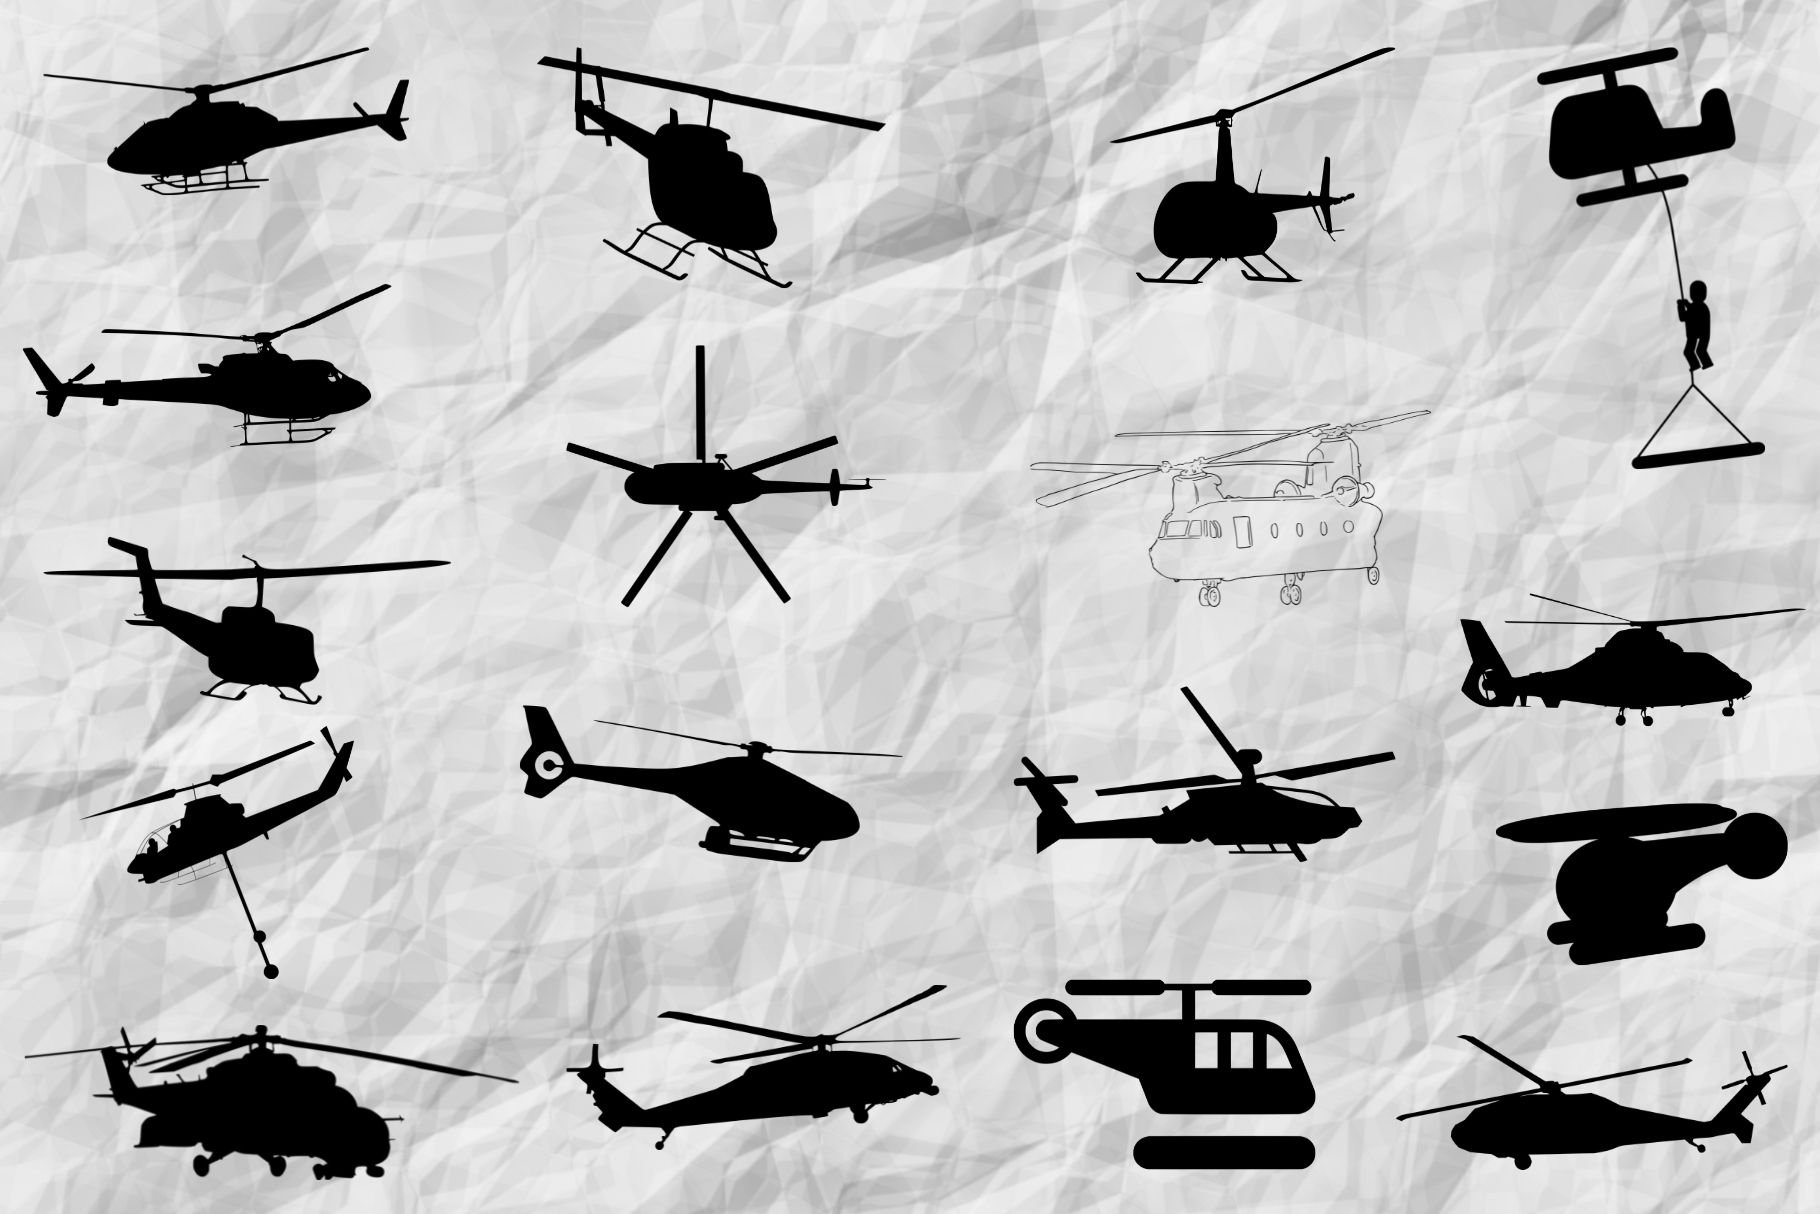 Helicopter Silhouette cover image.